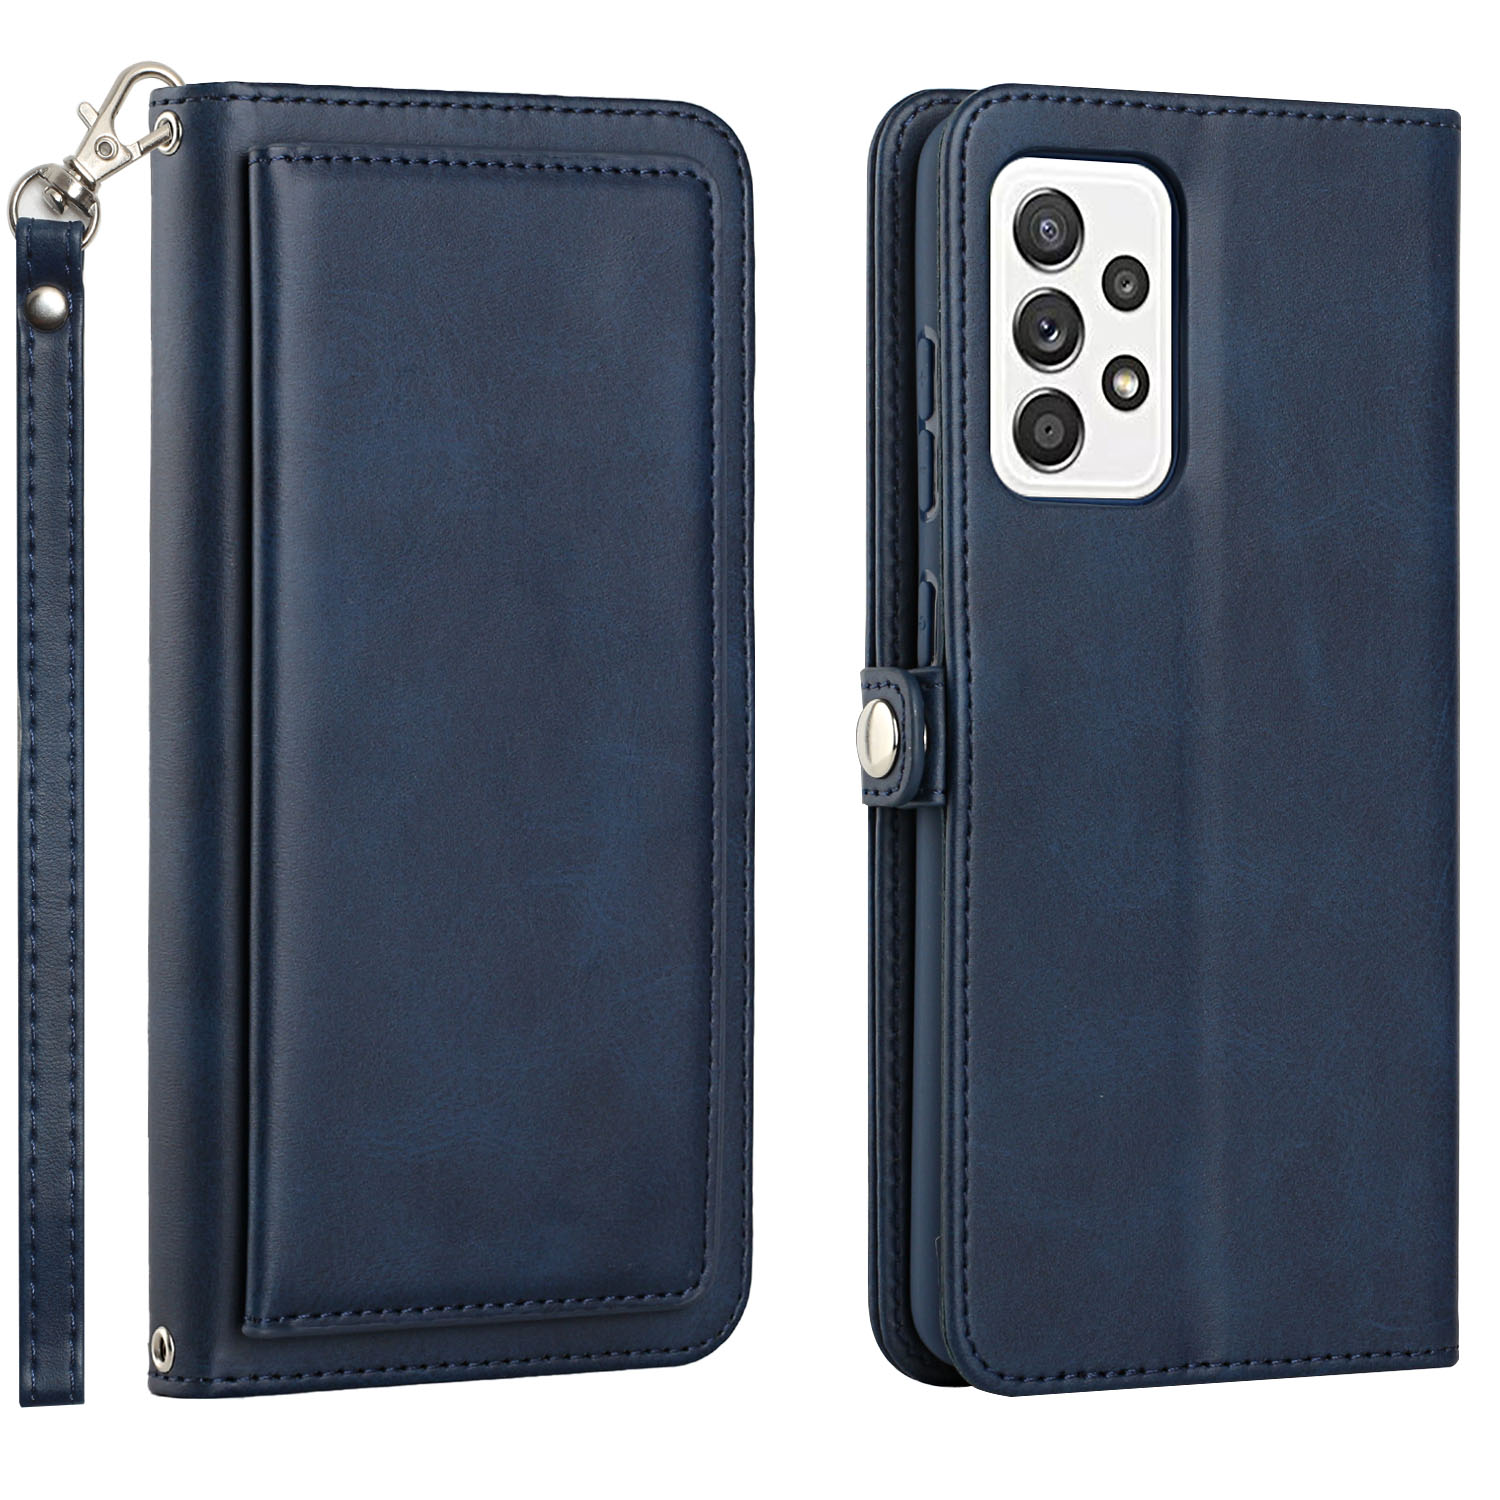 Premium PU Leather Folio WALLET Front Cover Case for Galaxy A52 5G (Blue)